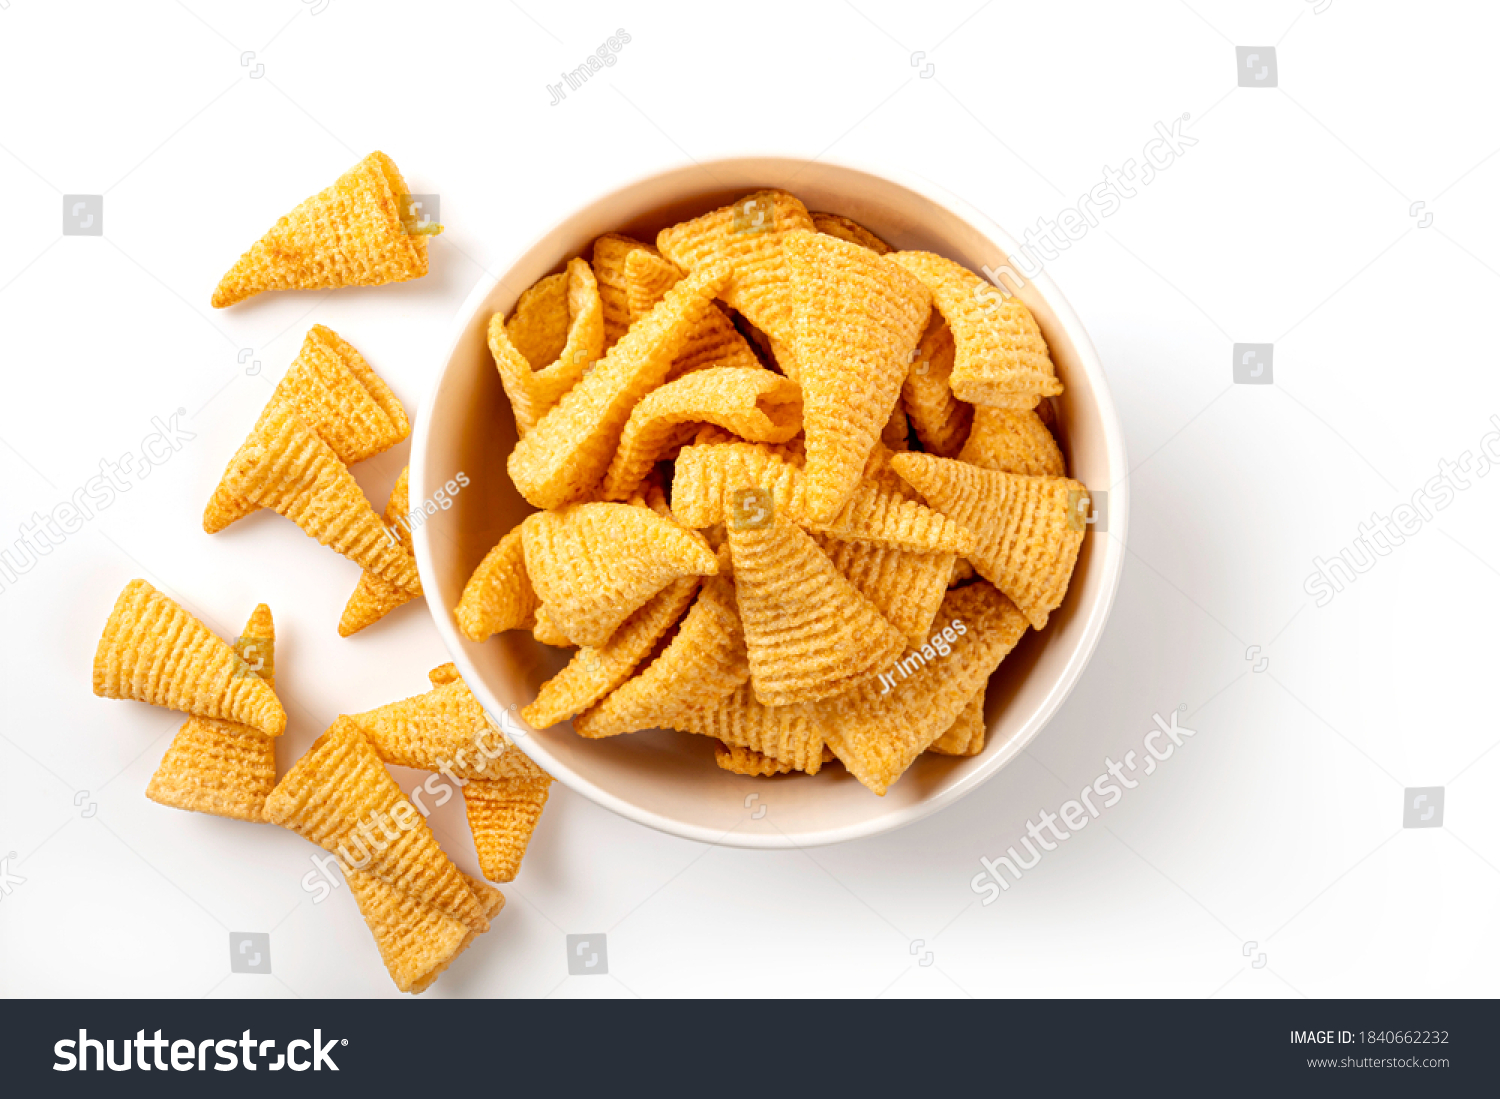 Top view Bowl of corn snack isolated on white background. #1840662232